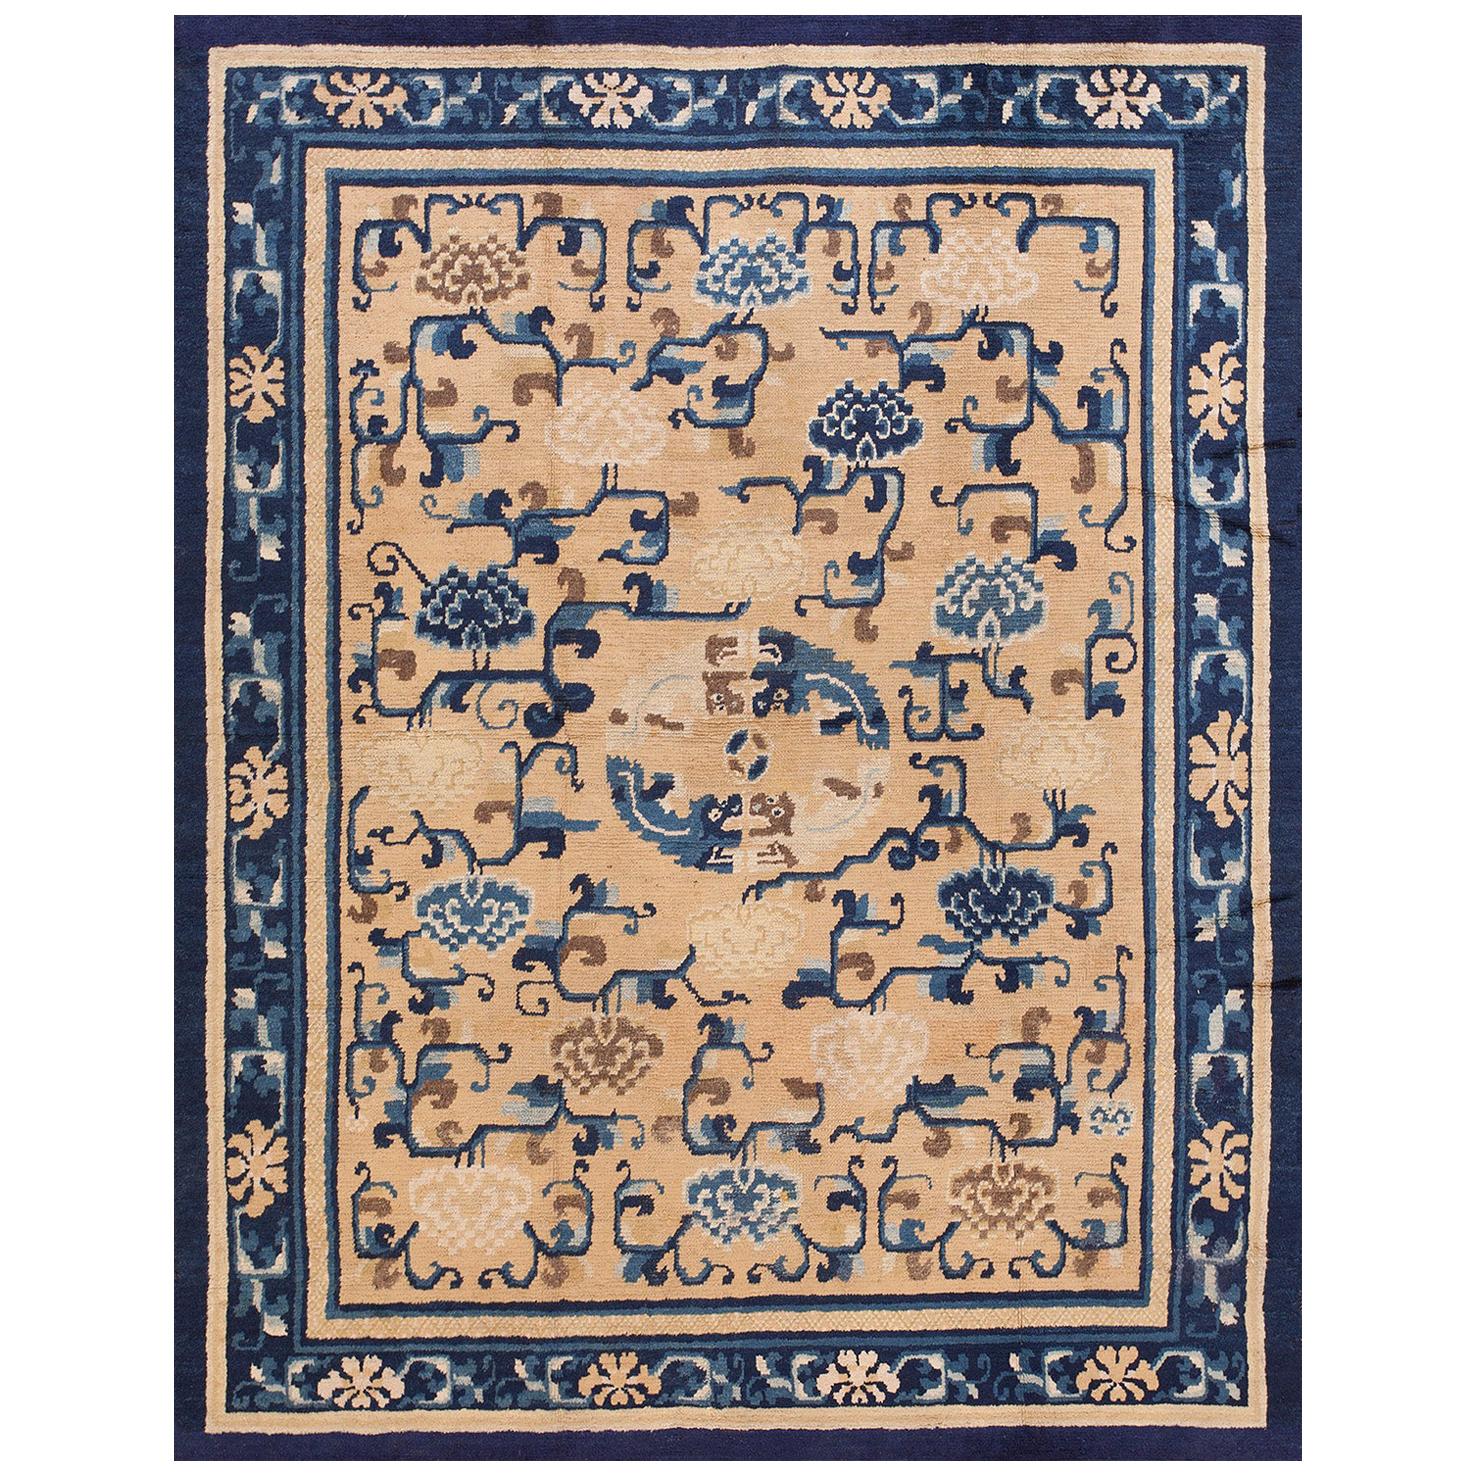 Antique Ningxia Chinese Carpet For Sale